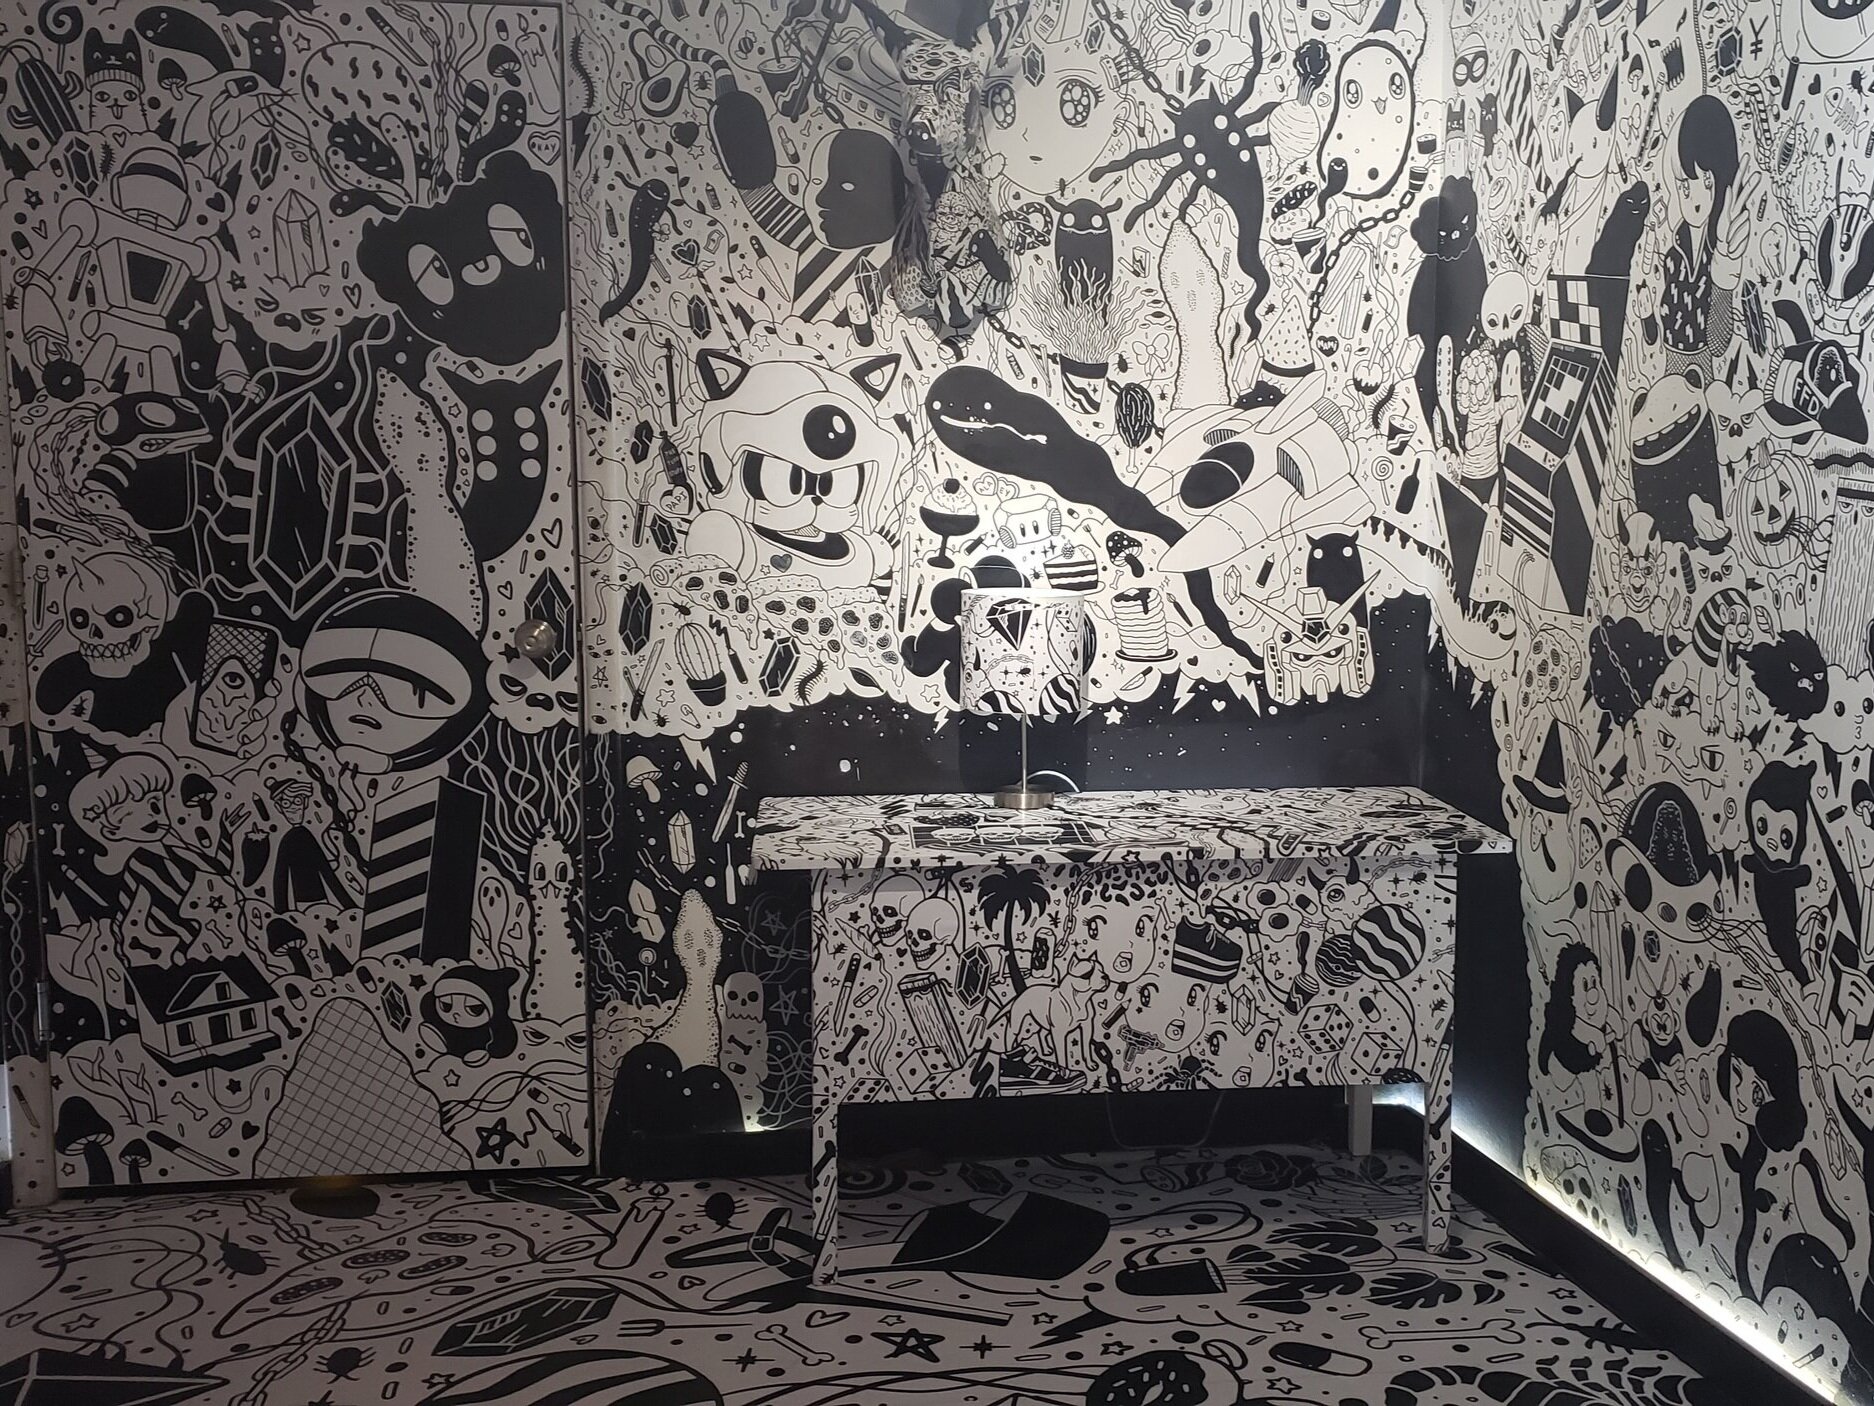 Walls of an art exhibit with black and white cartoon art